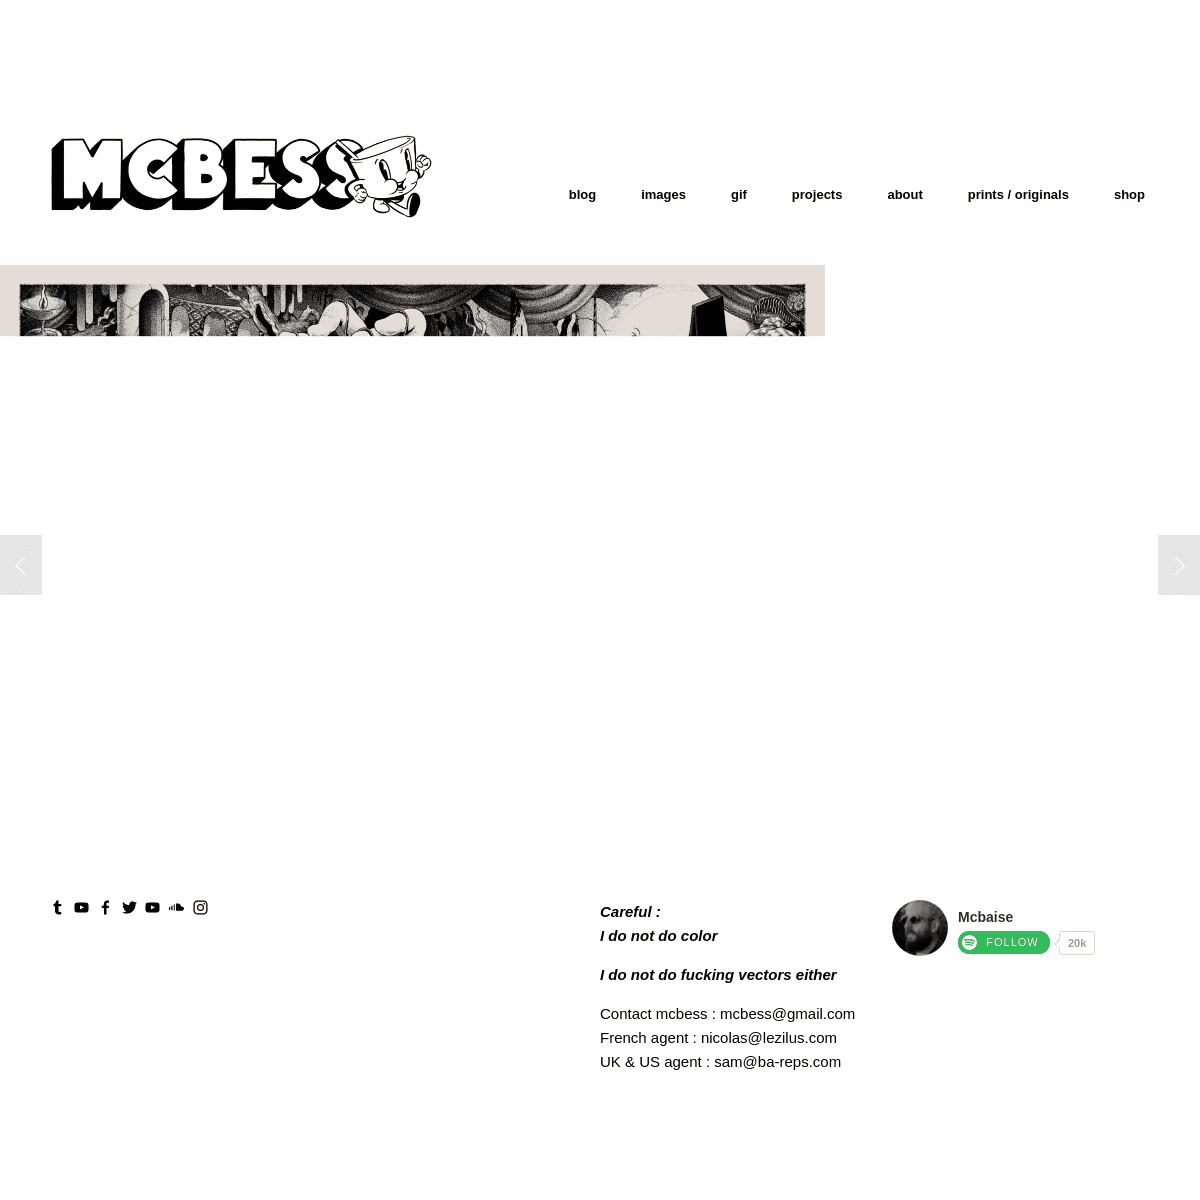 A complete backup of https://mcbess.com